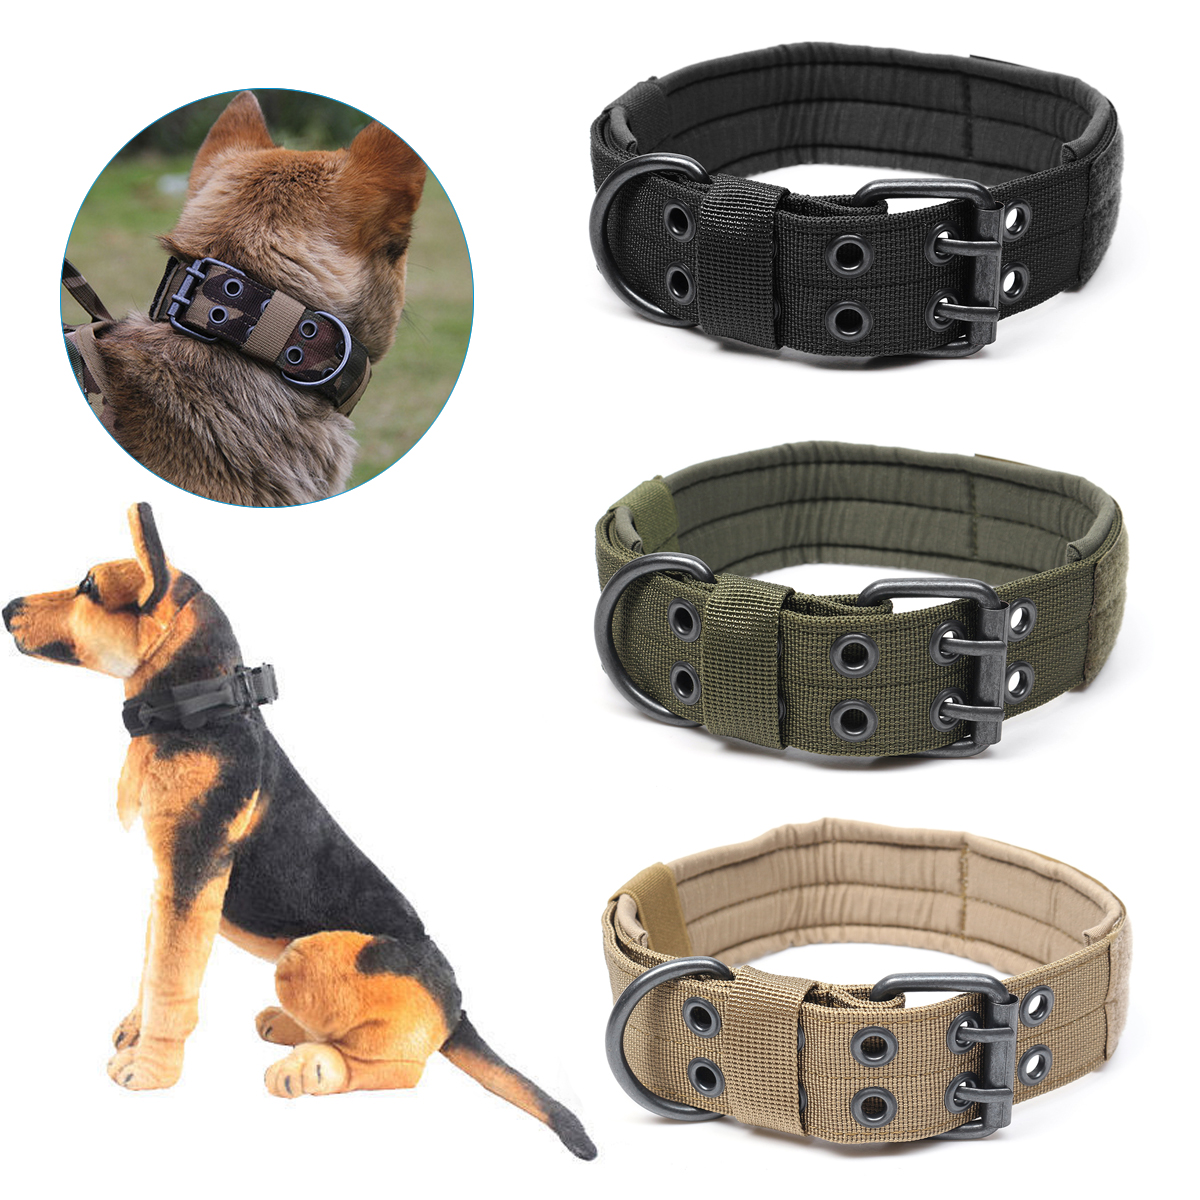 Adjustable-Training-Dog-Collar-Nylon-Tactical-Dog-Collar-Military-With-Metal-D-Ring-Buckle-1366535-2